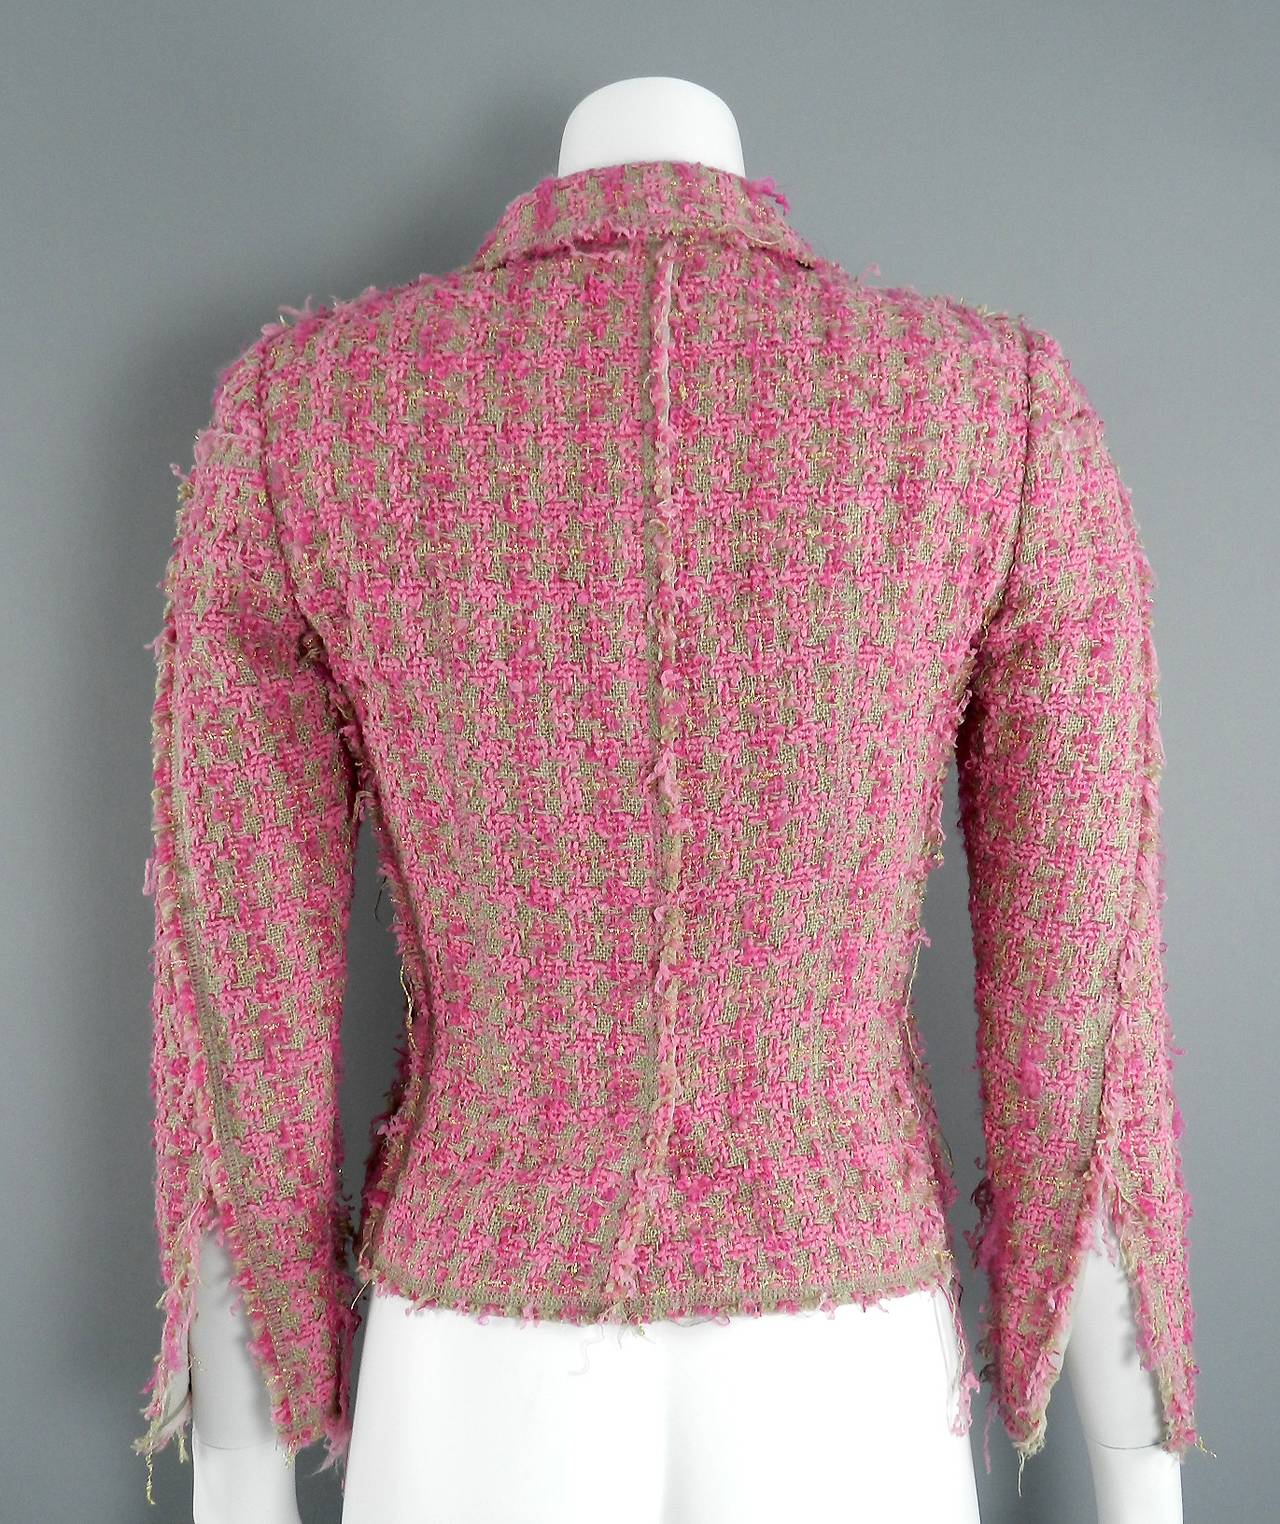 Junya Watanabe Comme des Garcons pink tweed jacket. Tagged size XS (USA 0/2). To fit 32